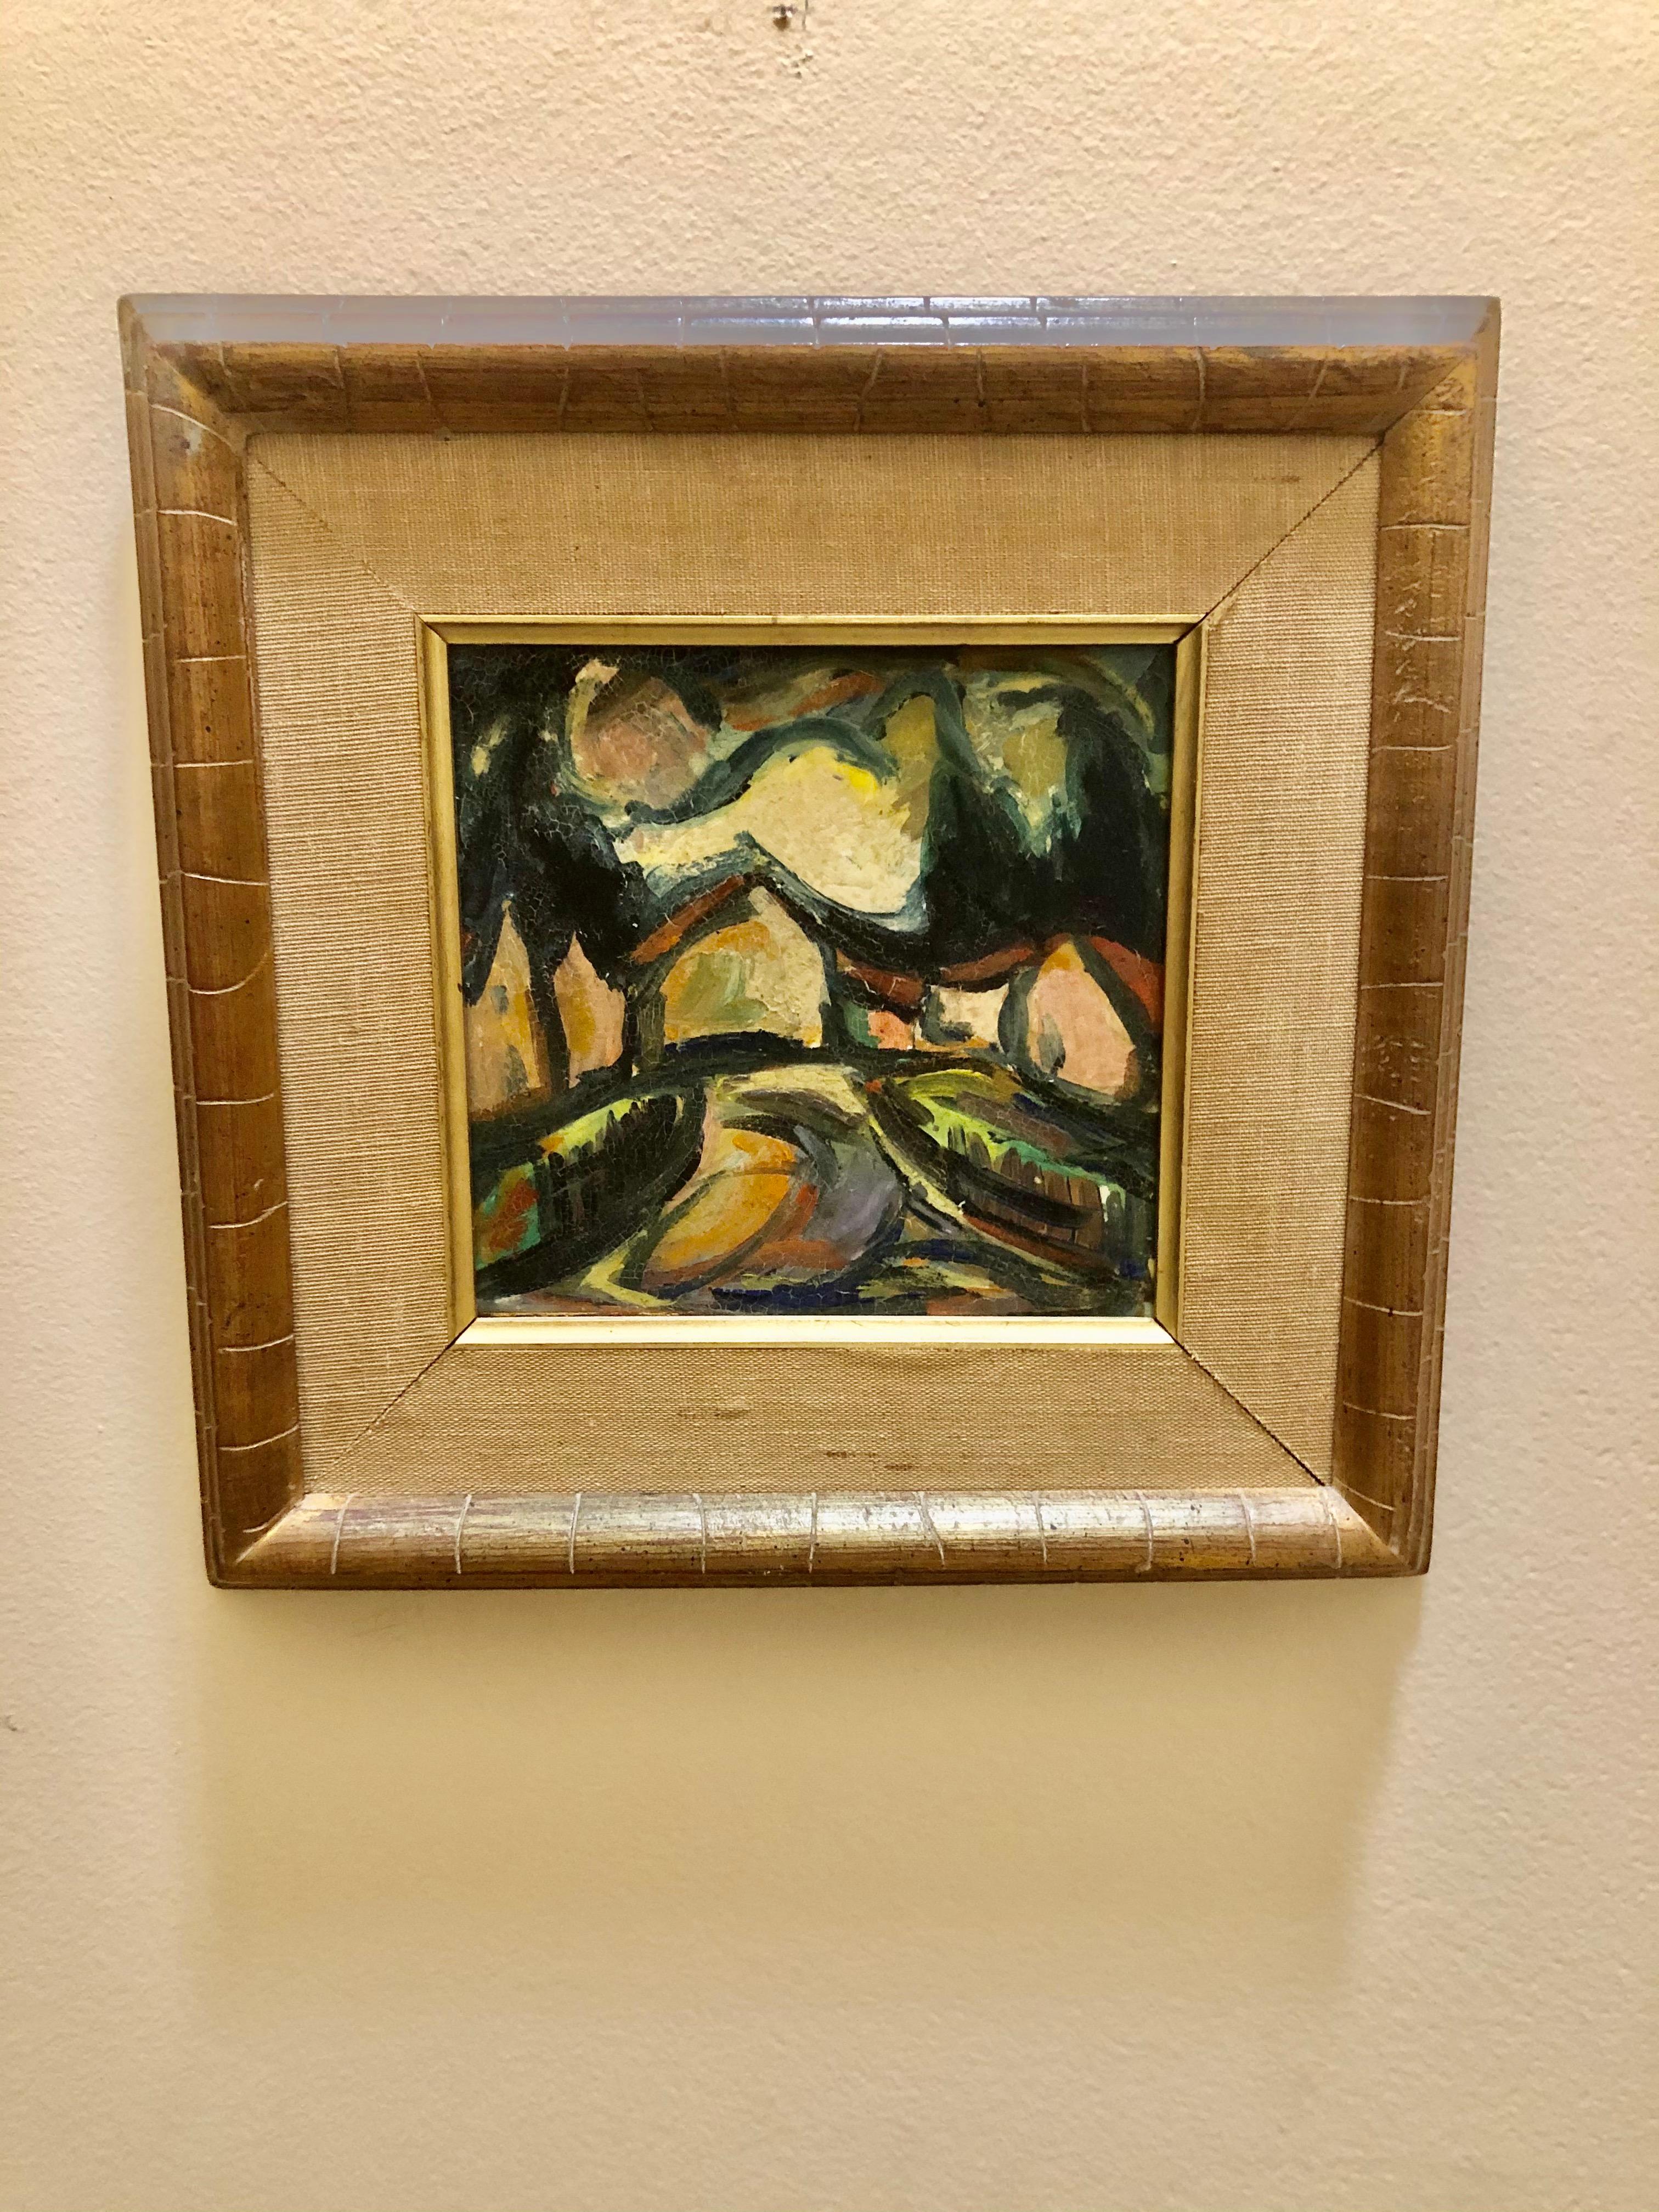 Early 20th Century German Expressionist - Brown Landscape Painting by Unknown